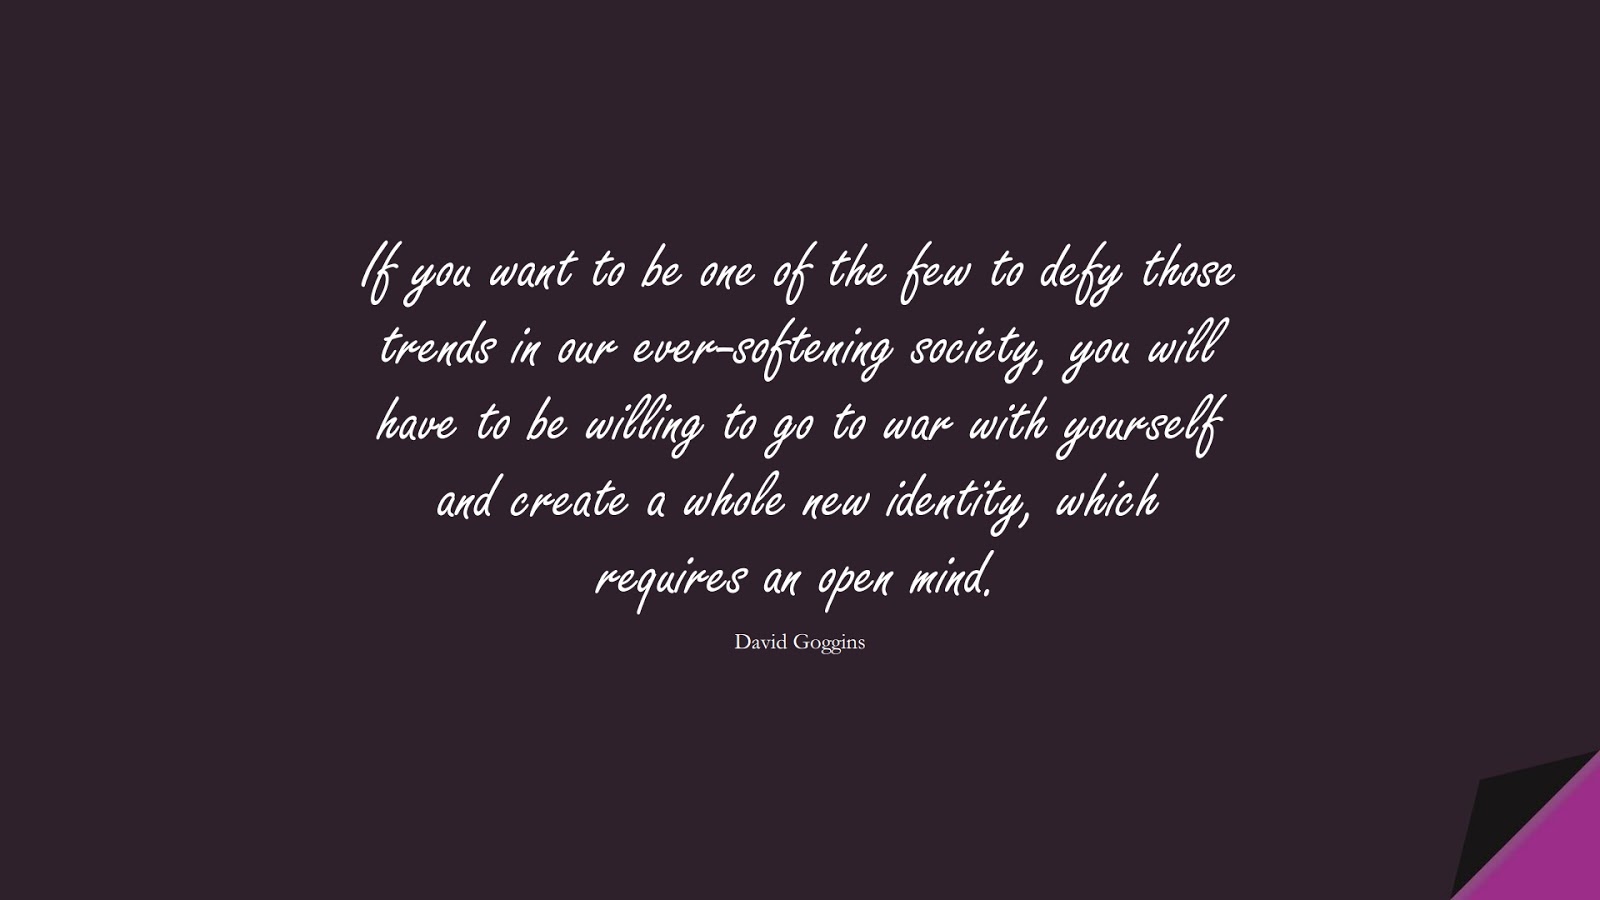 If you want to be one of the few to defy those trends in our ever-softening society, you will have to be willing to go to war with yourself and create a whole new identity, which requires an open mind. (David Goggins);  #CourageQuotes